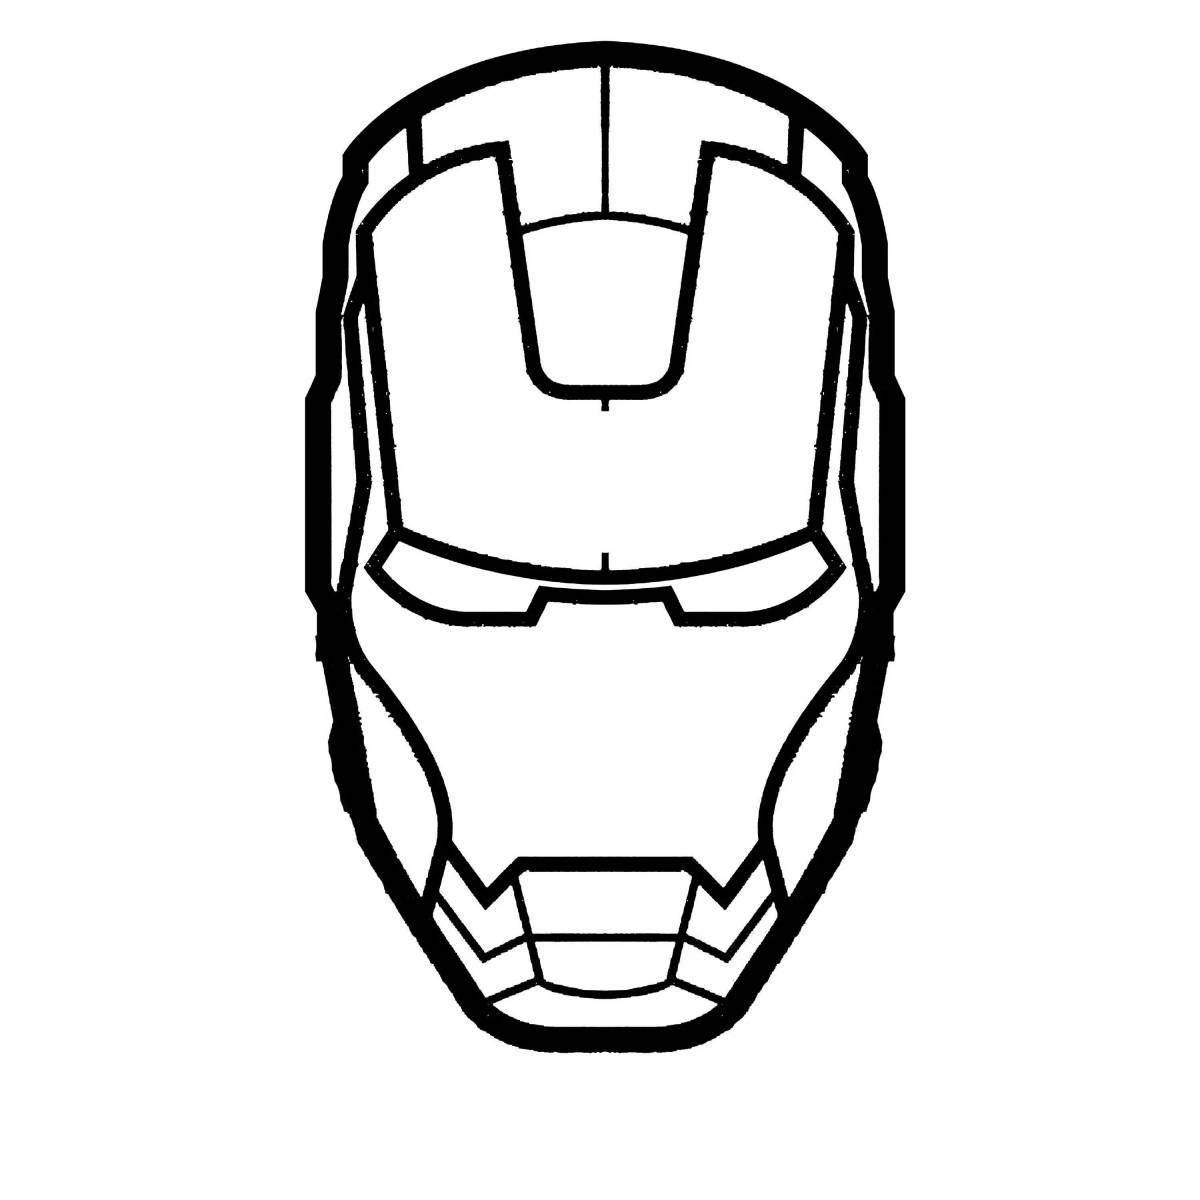 Attractive iron man mask coloring book